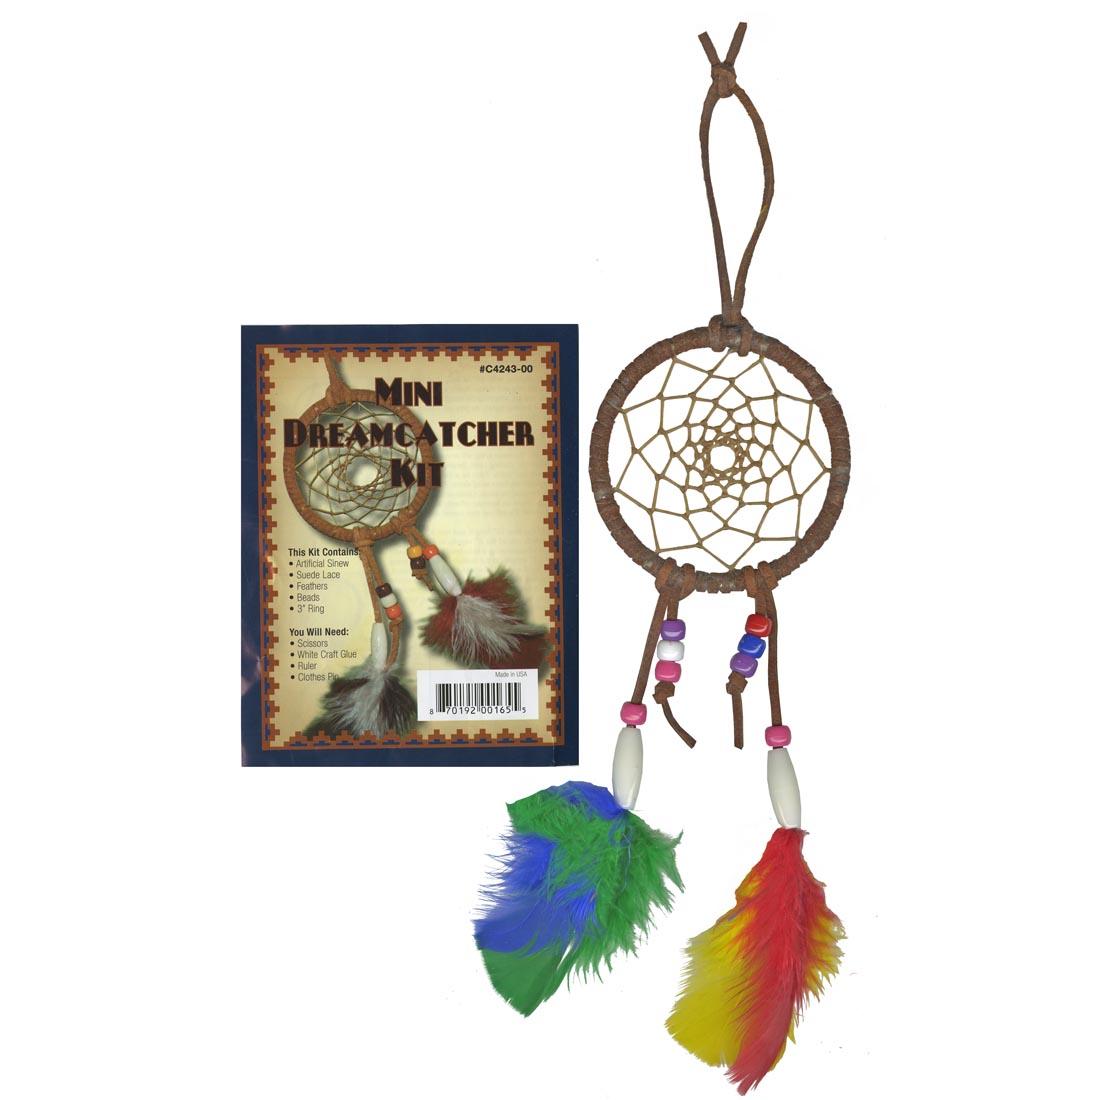 Mini Dreamcatcher Kit package beside a completed dreamcatcher